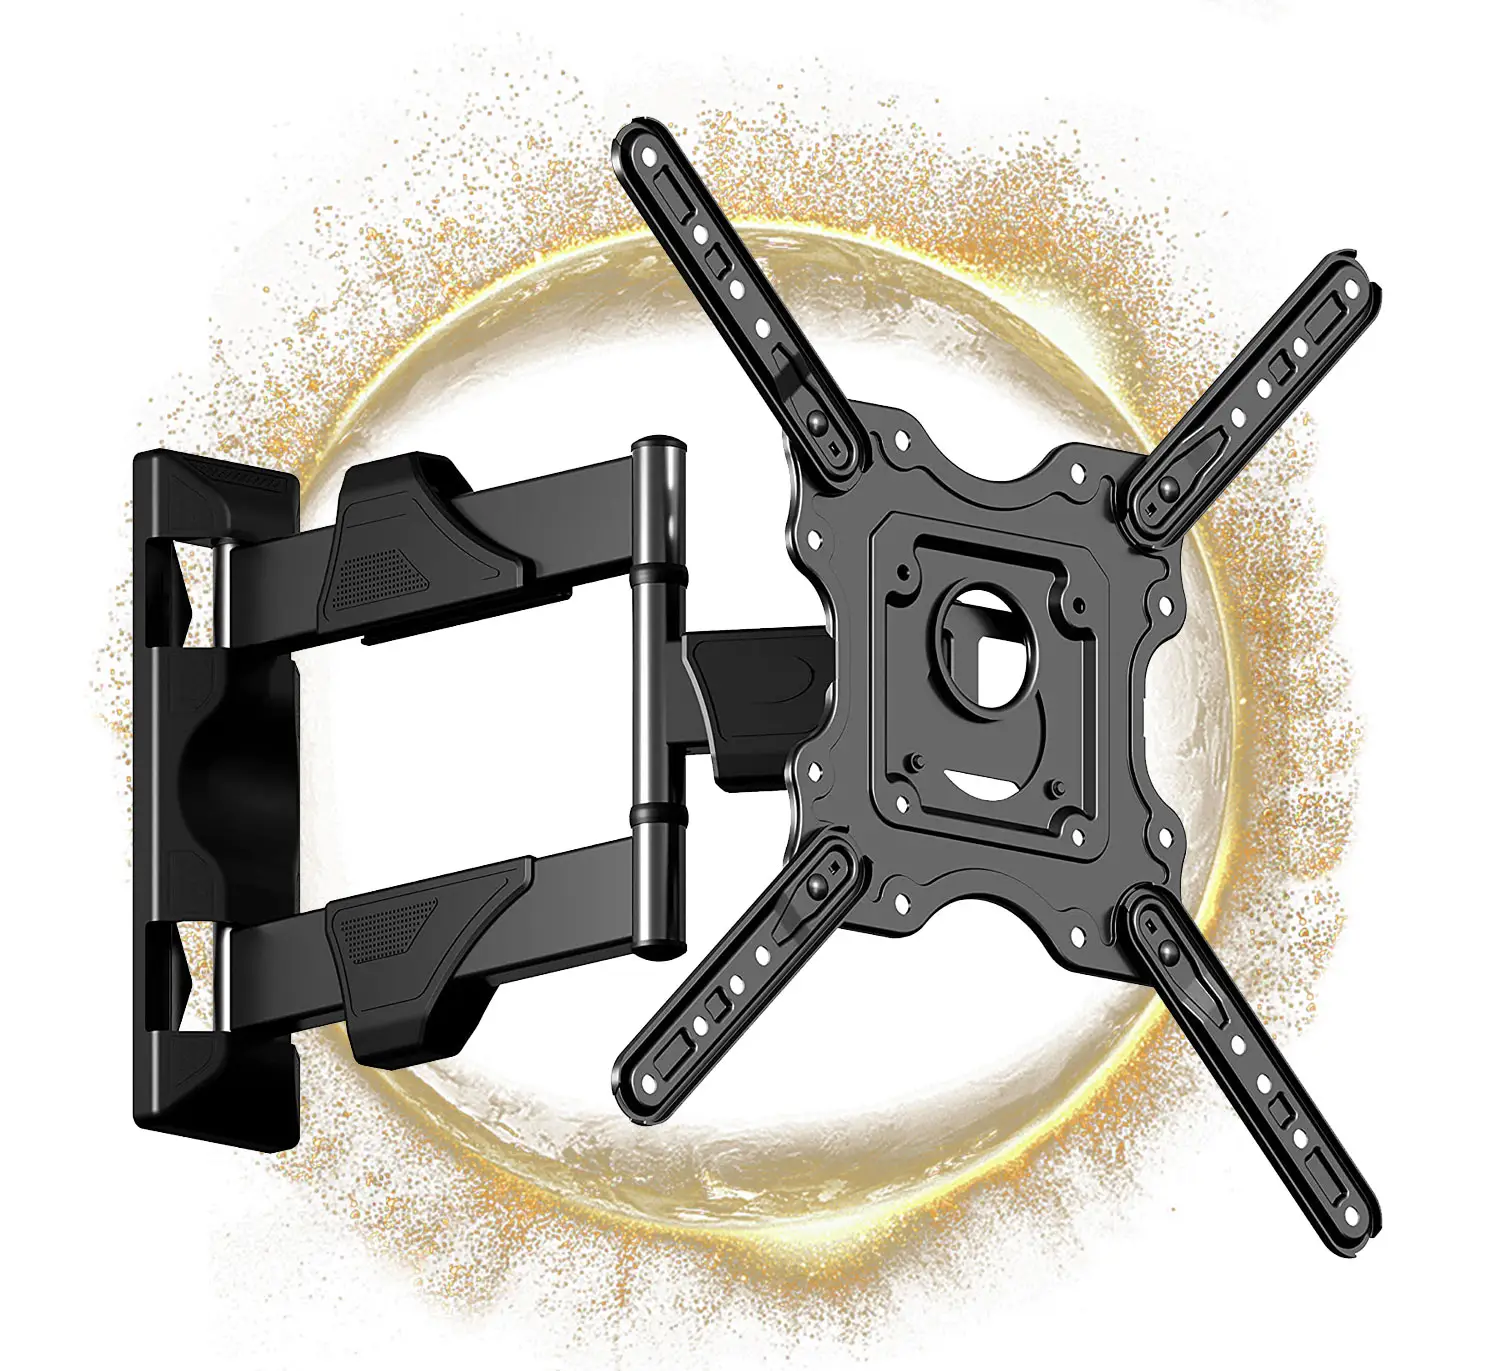 Nbjohson Hot Selling Extended Flip Out Fireplace Stand TV Mount